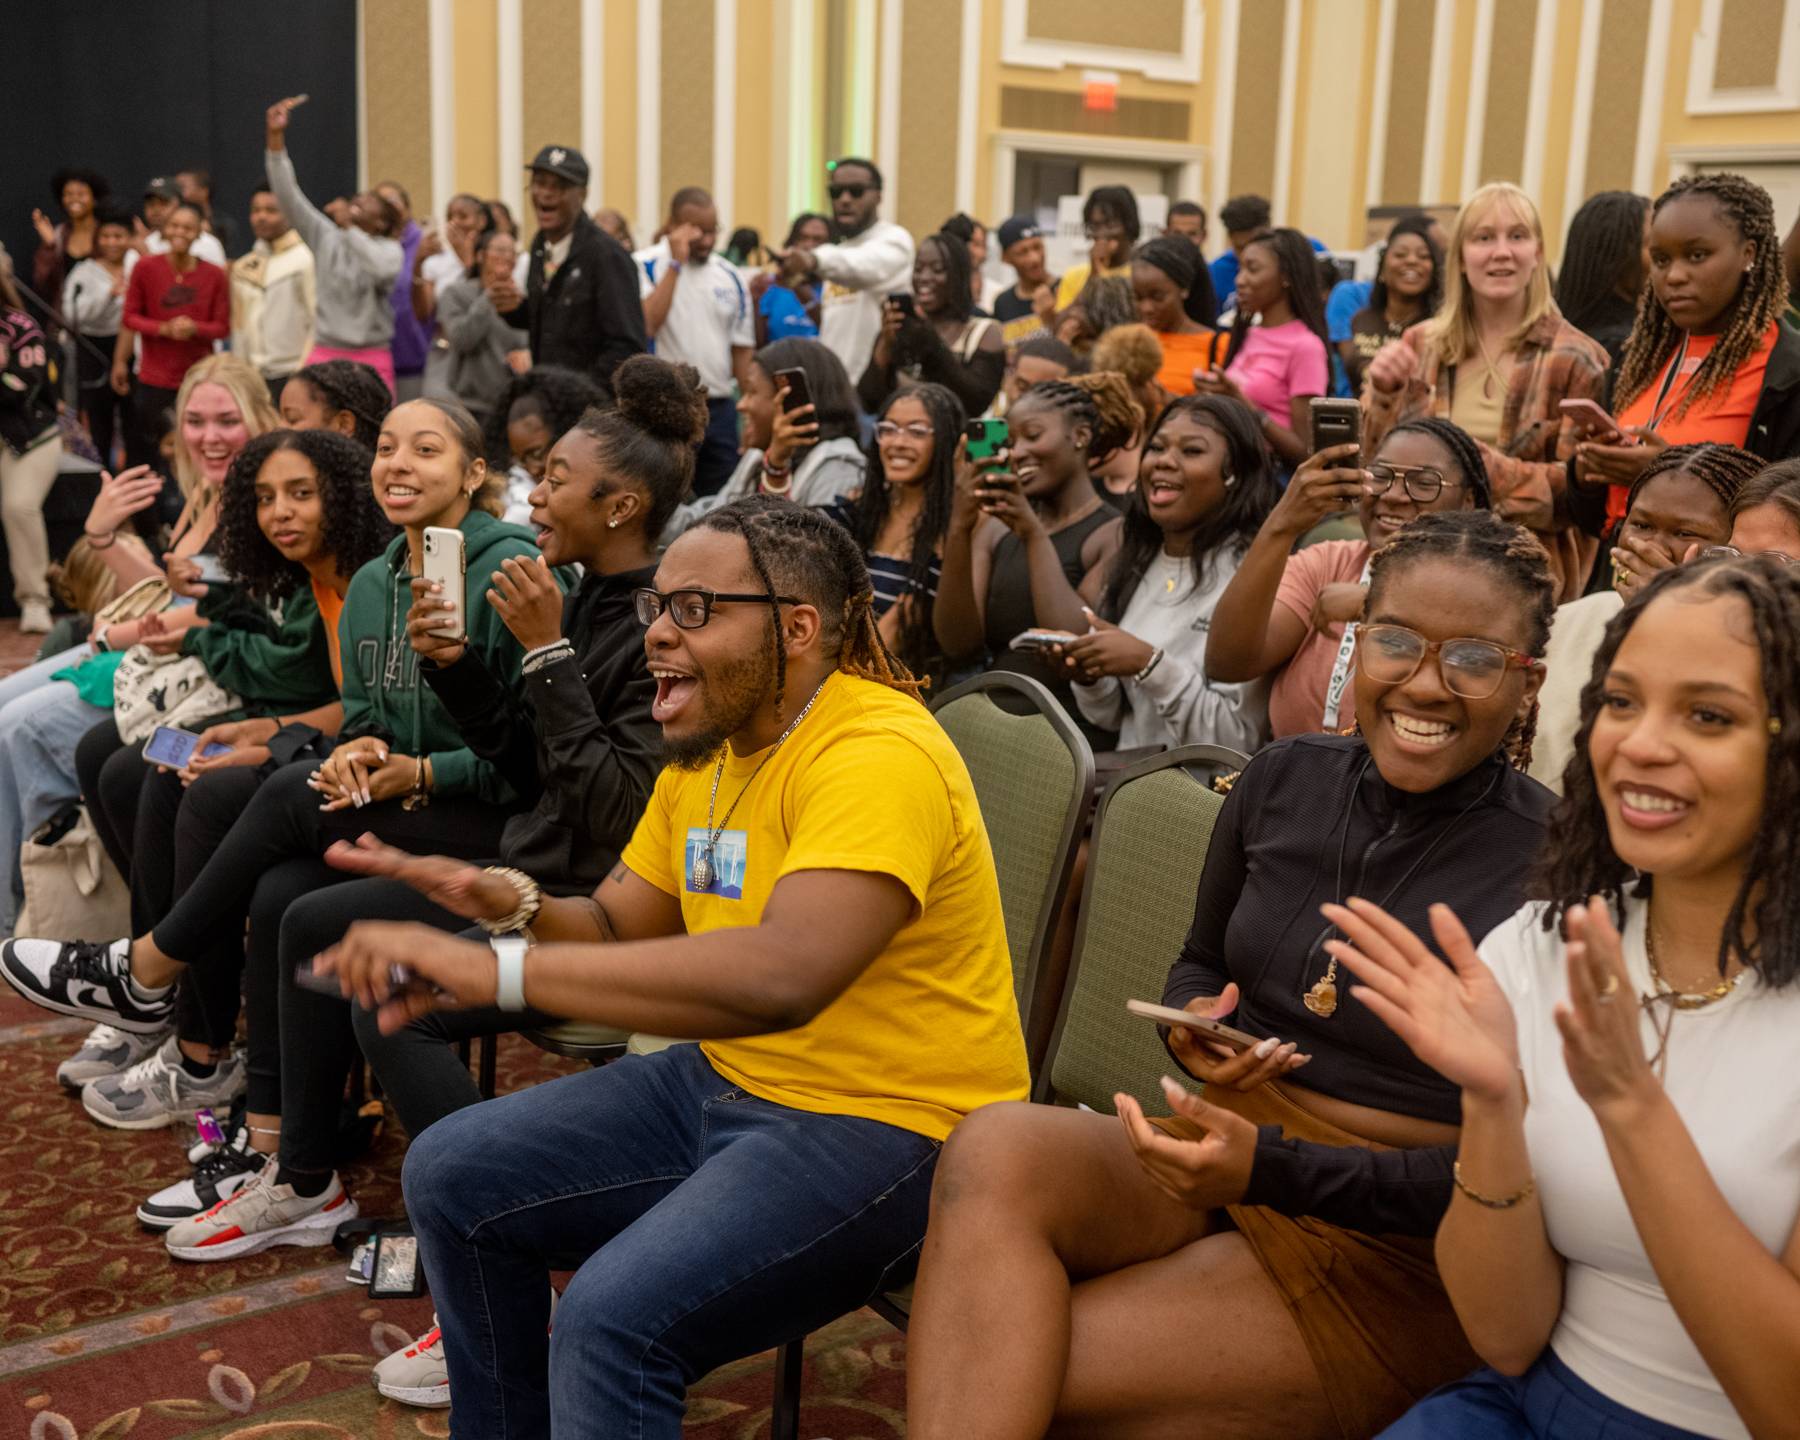 Students react to a performance at the Multicultural Student Expo in the Baker Ballroom